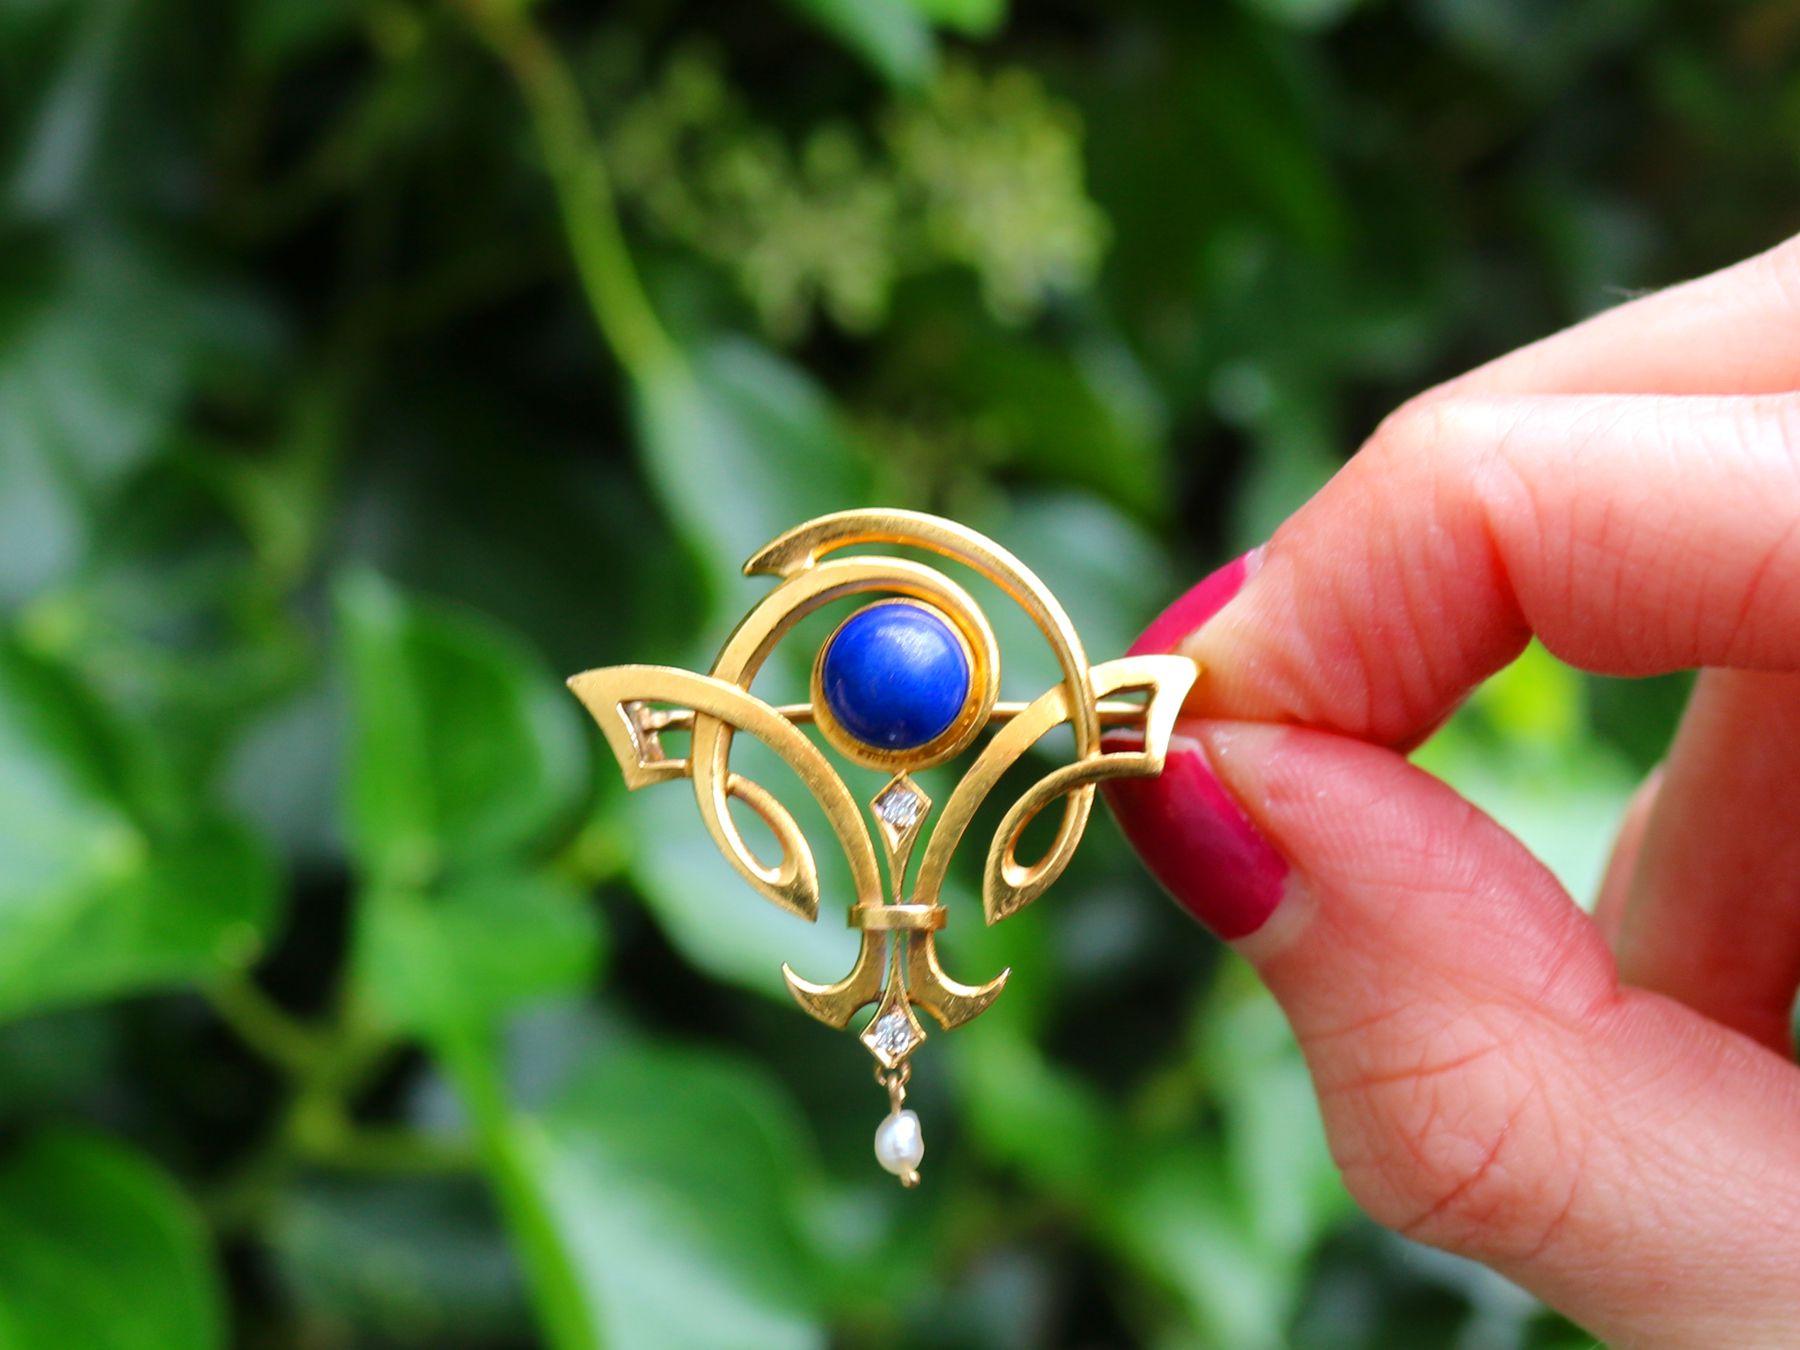 A stunning, fine and impressive antique 1910s 1.59 Carat lapis lazuli, 0.08 Carat diamond and natural pearl, 23 karat yellow gold Art Nouveau brooch; part of our diverse antique jewelry and estate jewelry collections.

This stunning, fine and